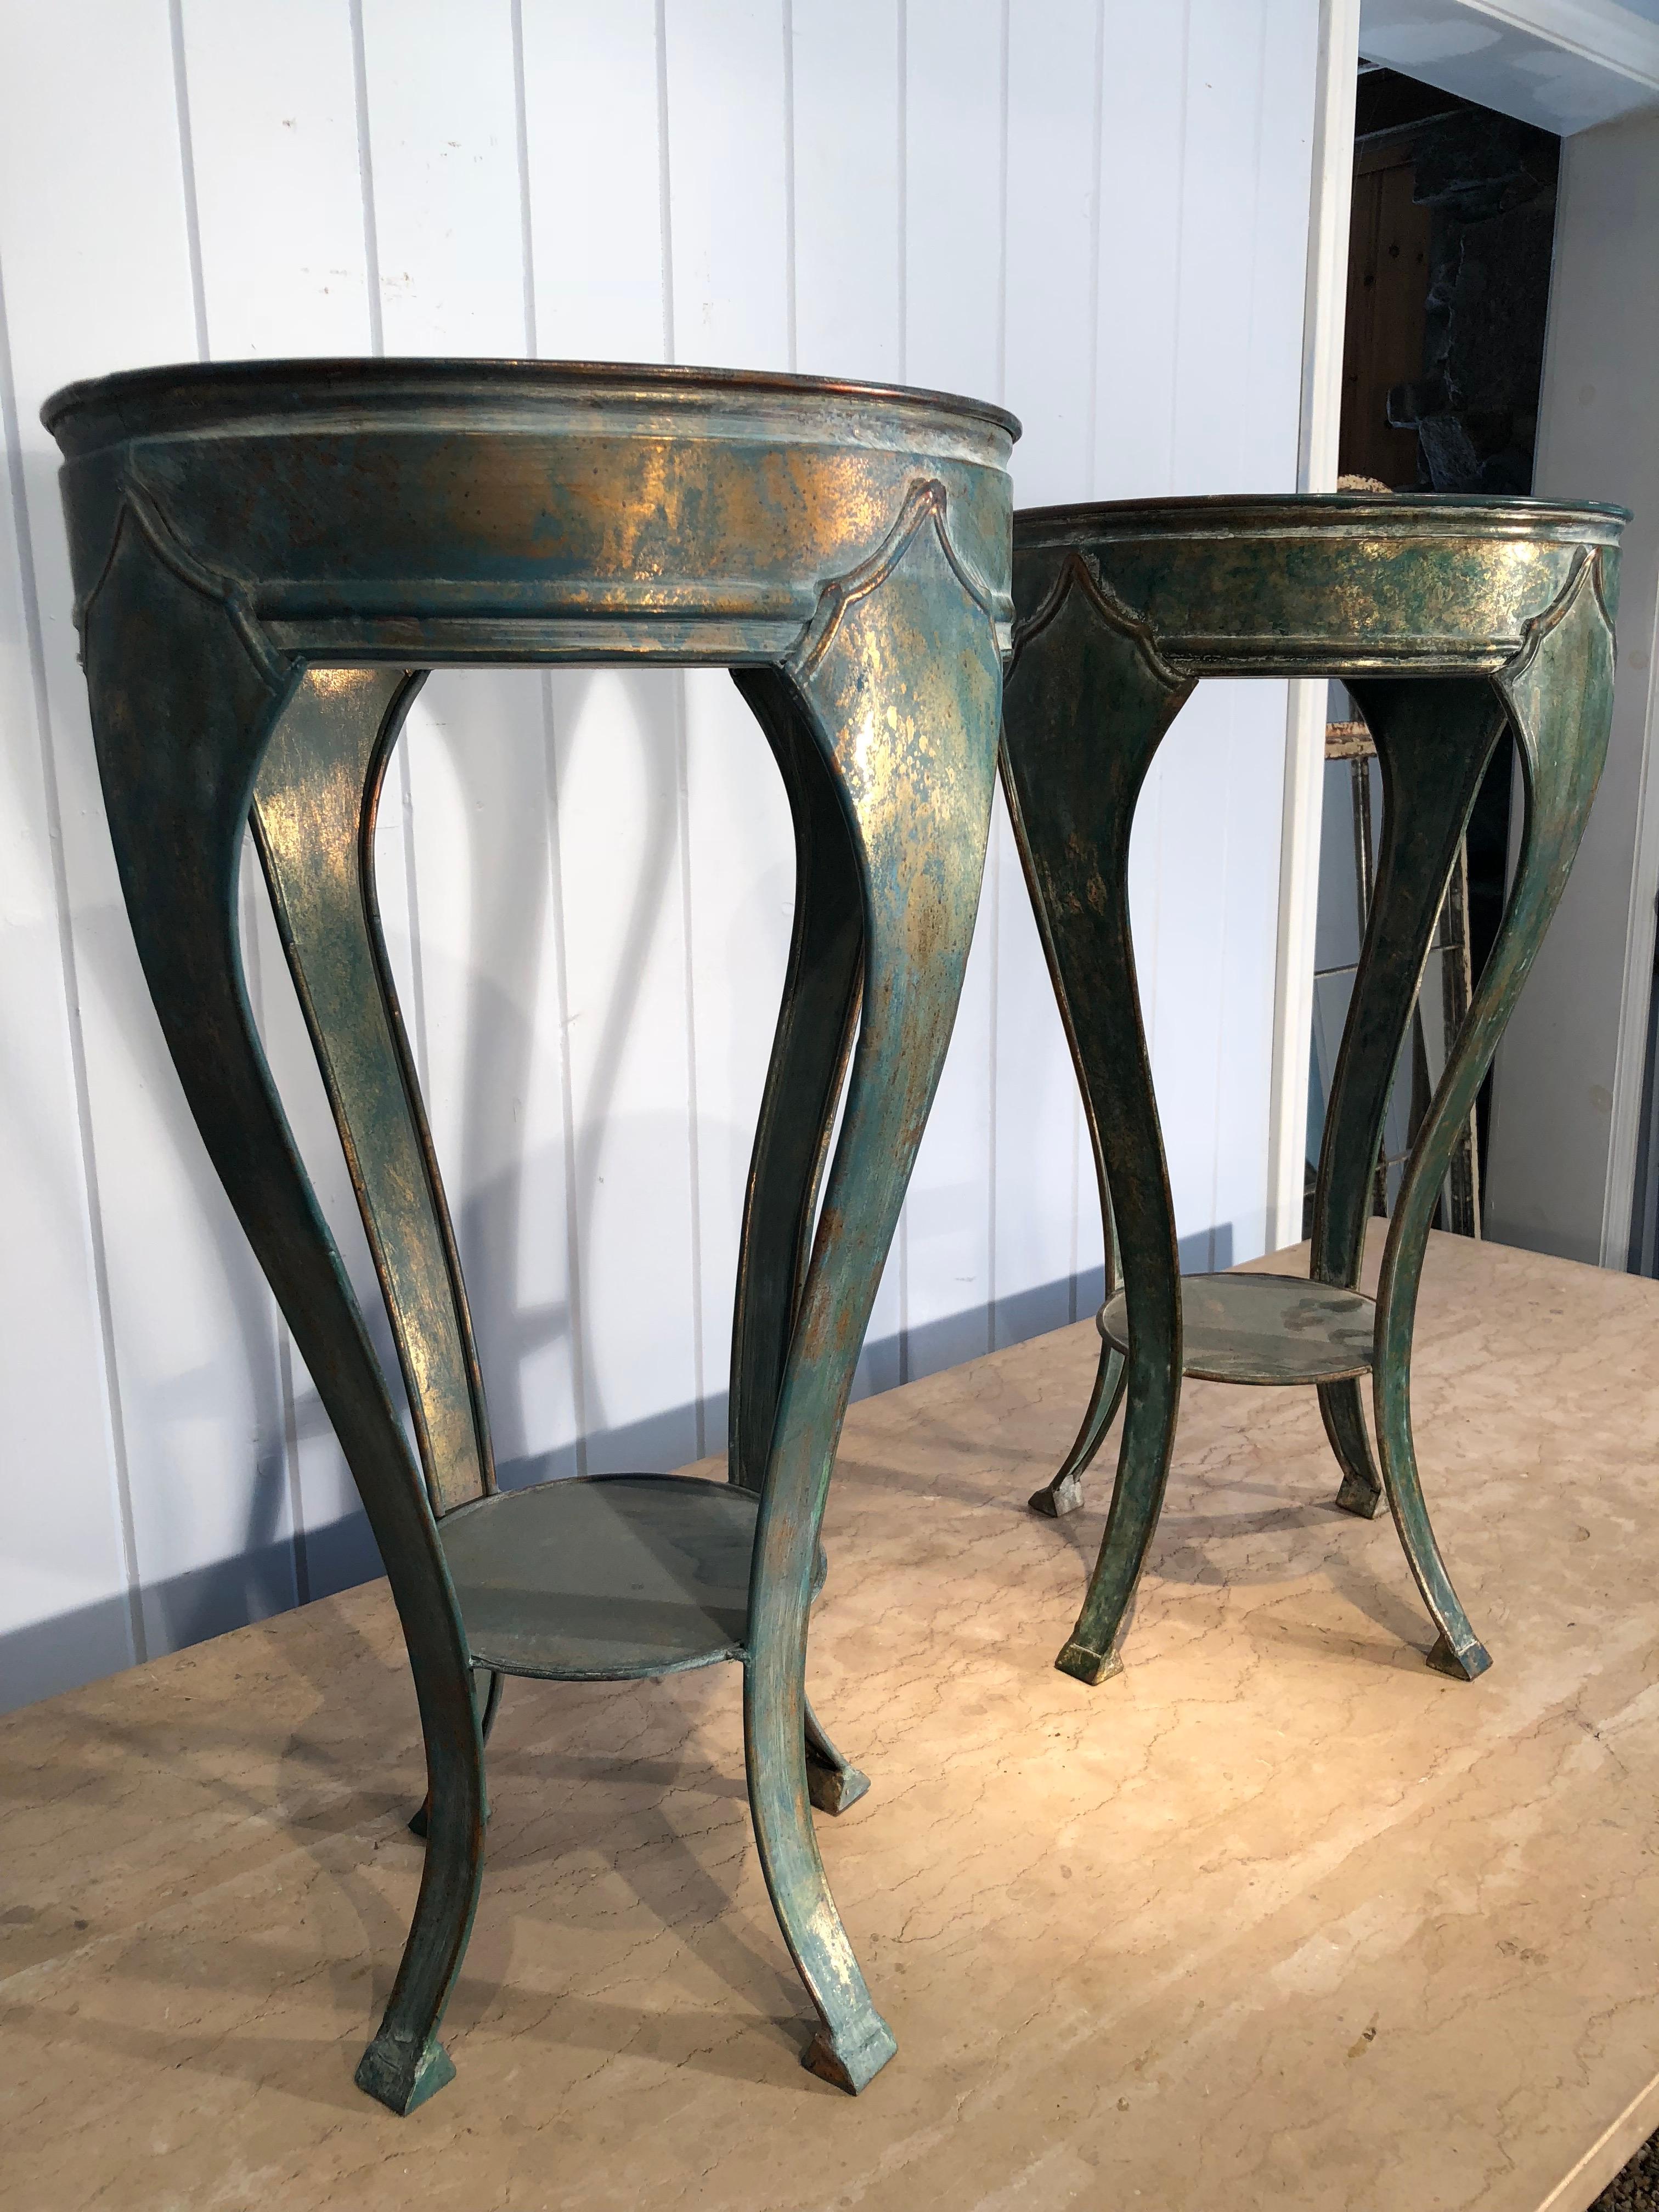 This is an unusual pair of lightweight brass plant stand tables that has been faux-finished in a lovely verdigris color that allows the brass to glint through. Perfect as side tables with glass or marble tops, or plant them up for a decorative